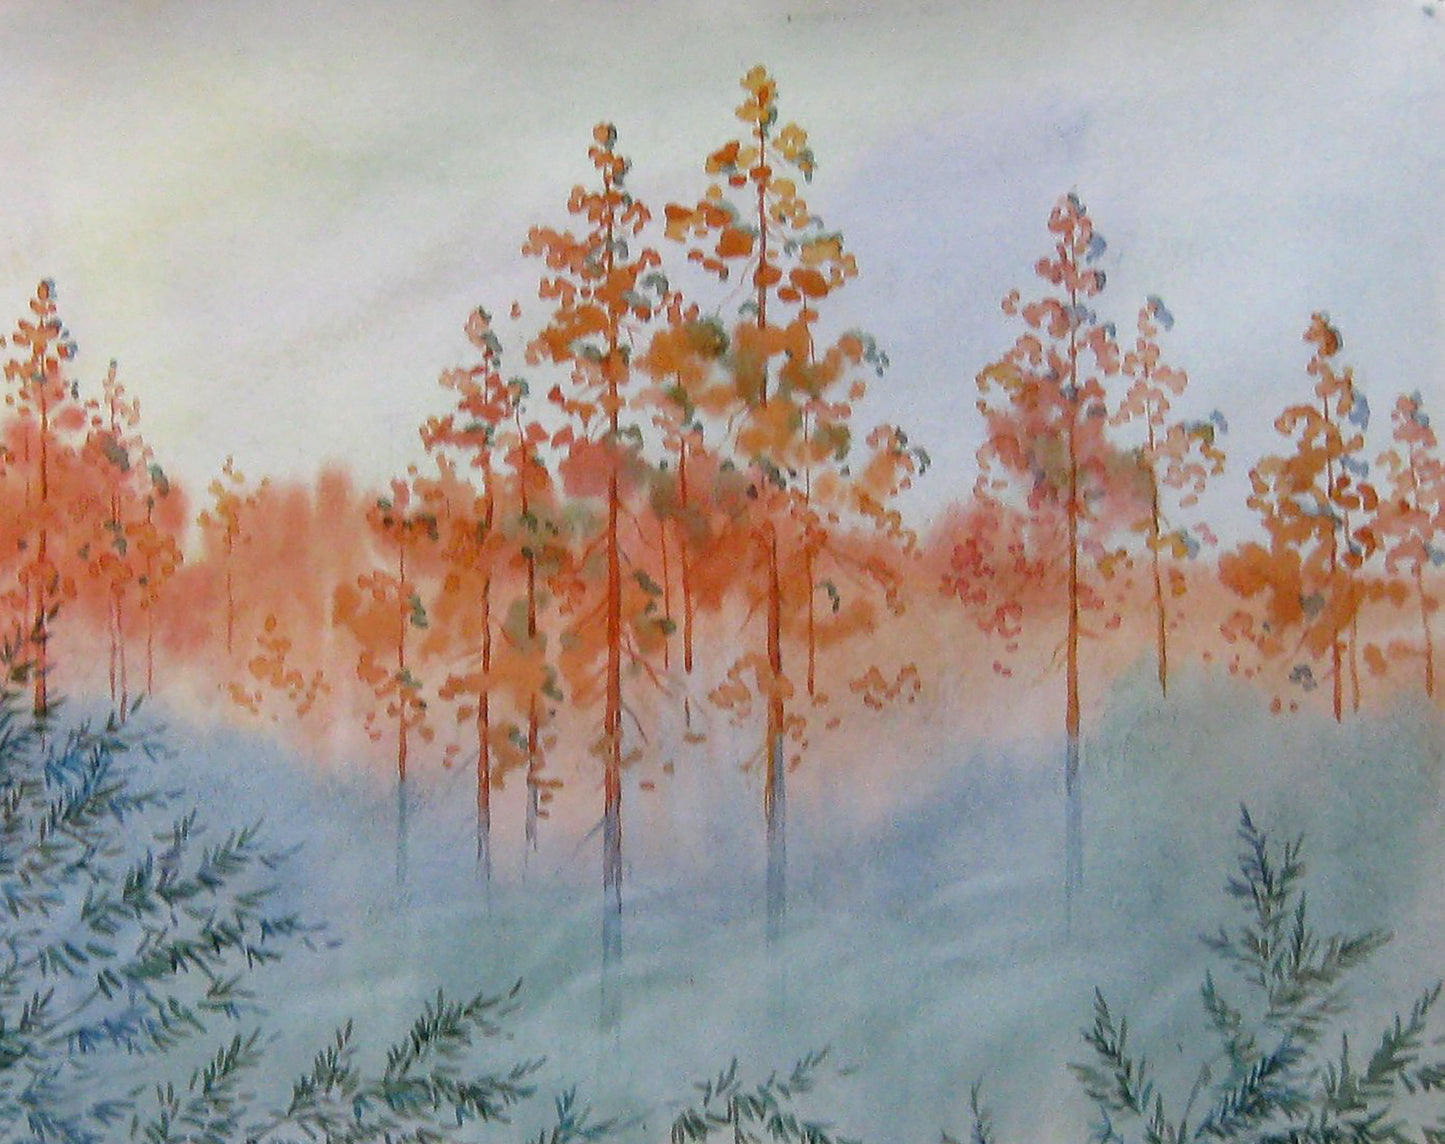 Watercolor painting depicting "Morning with Fog" by Valery Savenets